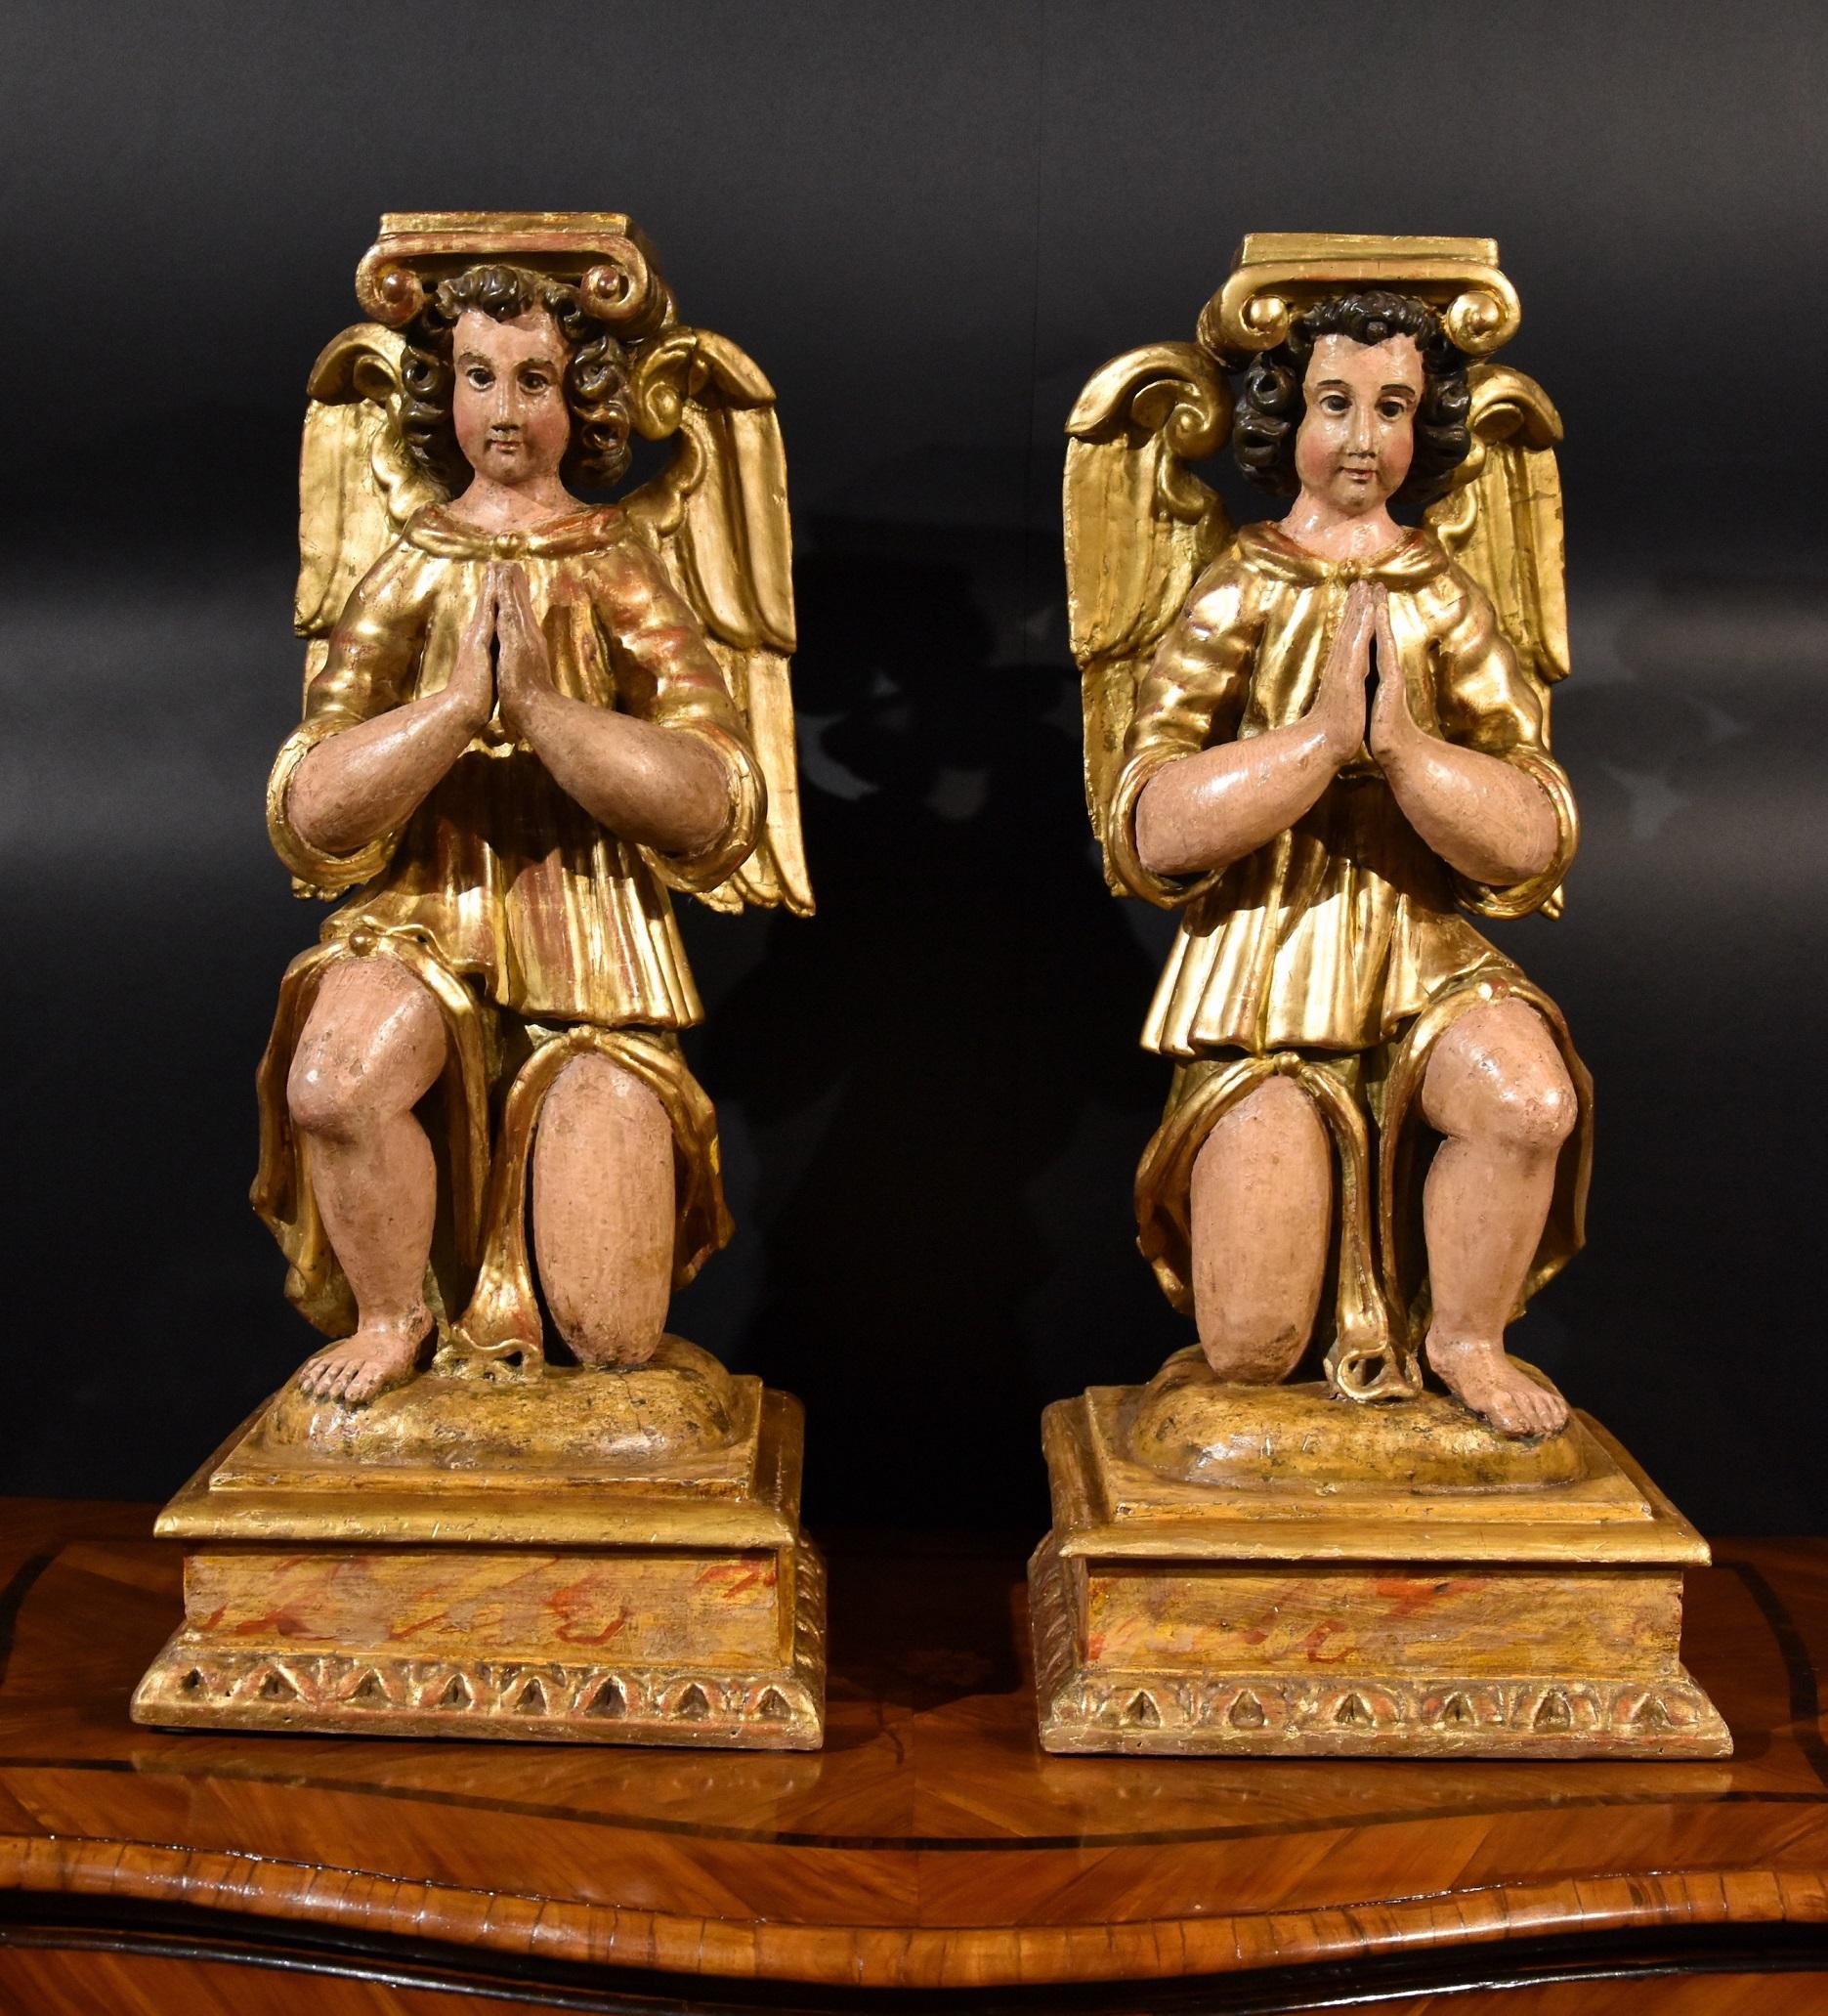 Pair of sculptures depicting two winged angels in carved wood Figurative Sculpture - Pair Sculptures Winged Angels Wood Tuscany 17/18th Century Old master Gold Art 